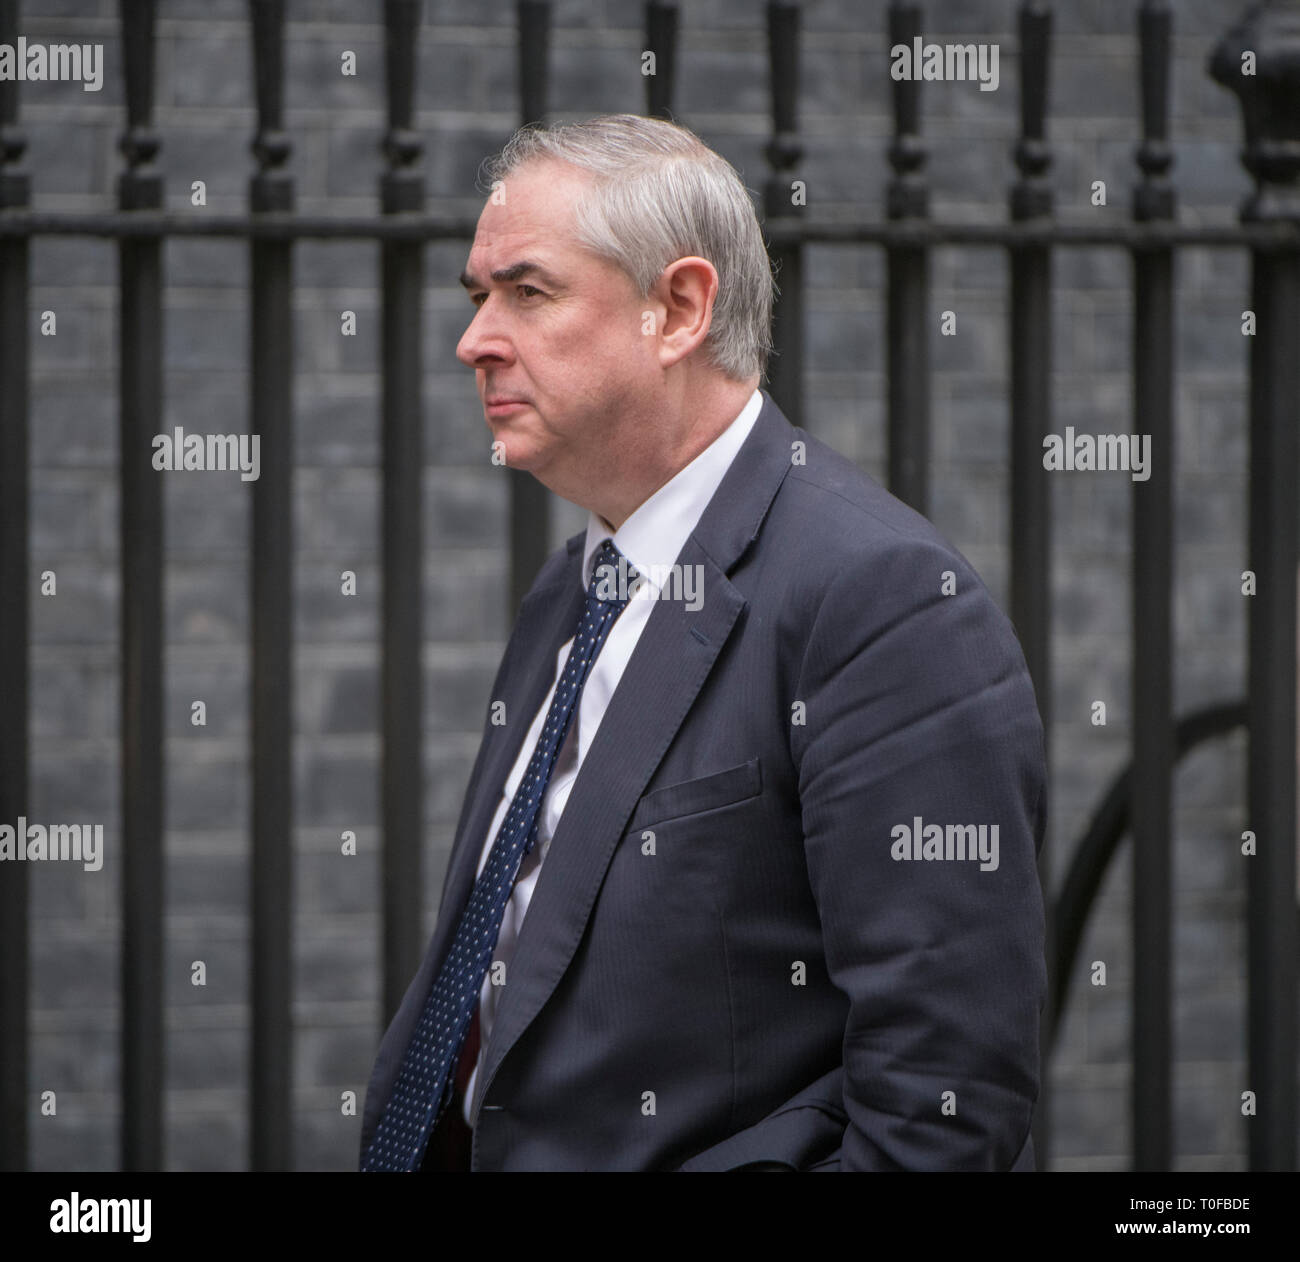 London, UK. 19th Mar 2019. Geoffrey Cox QC, Attorney General arrives in Downing Street for weekly cabinet meeting. Credit: Malcolm Park/Alamy Live News. Stock Photo